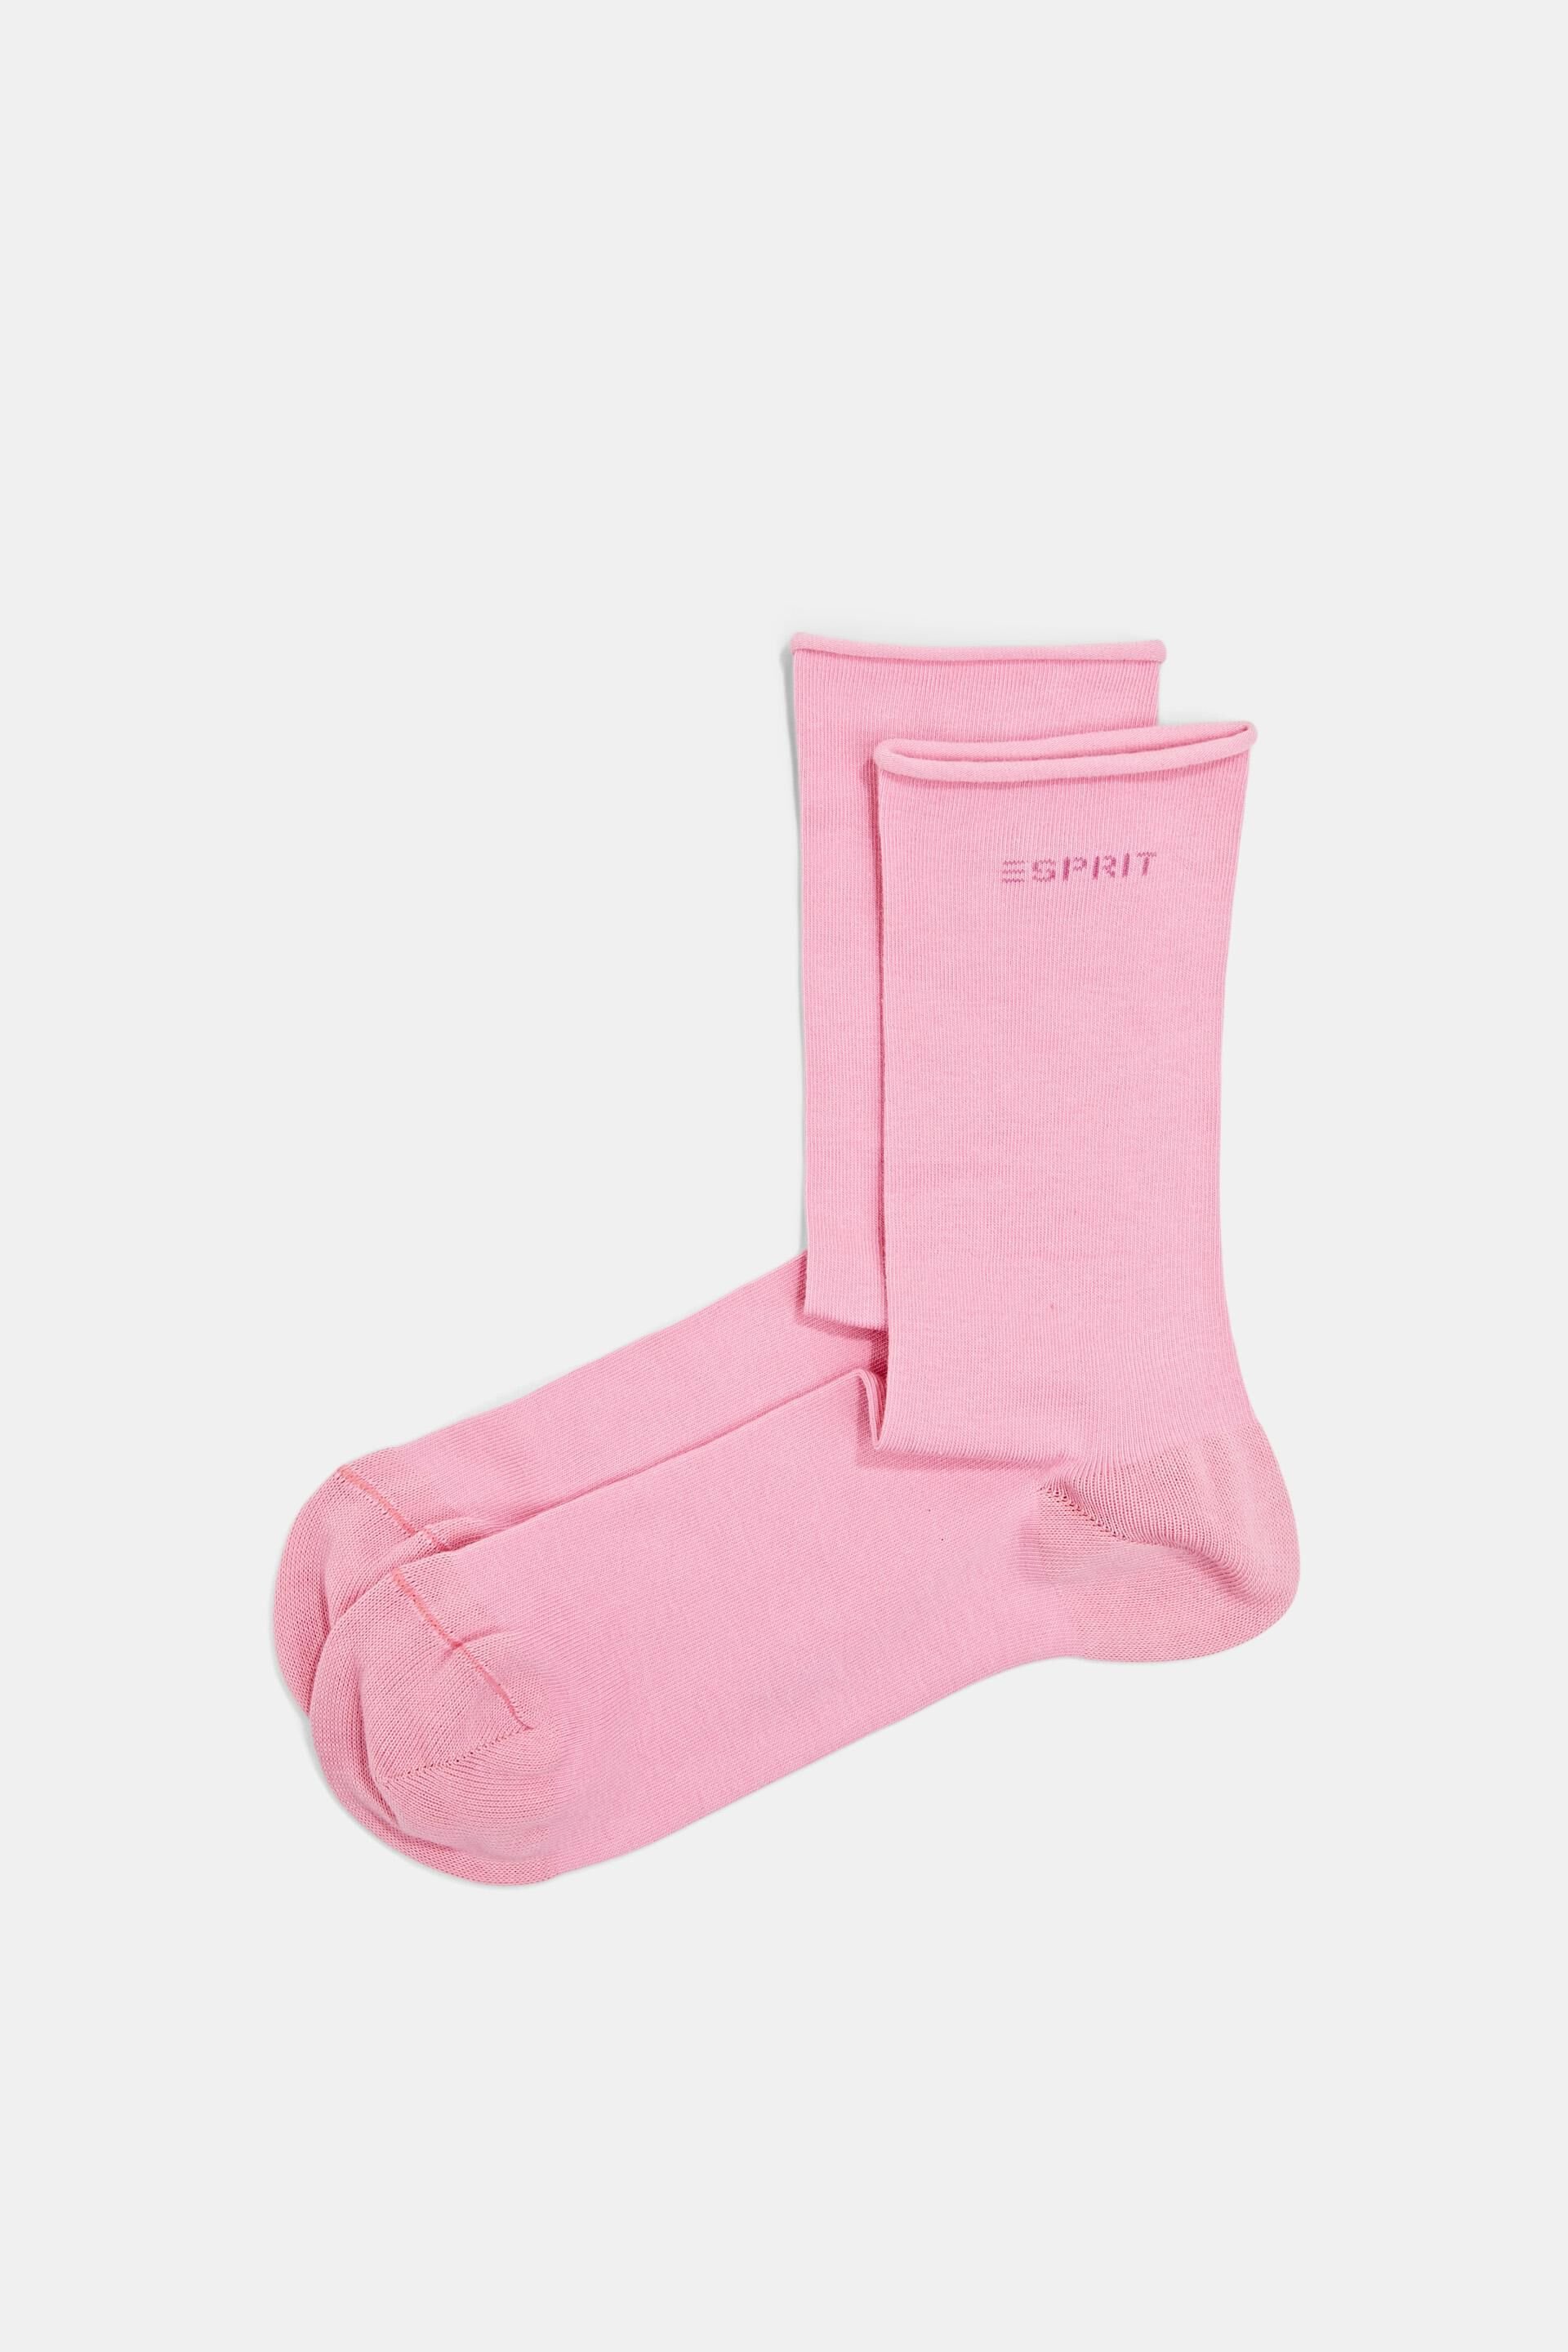 Esprit cotton rolled sock of organic with 2-pack edges,